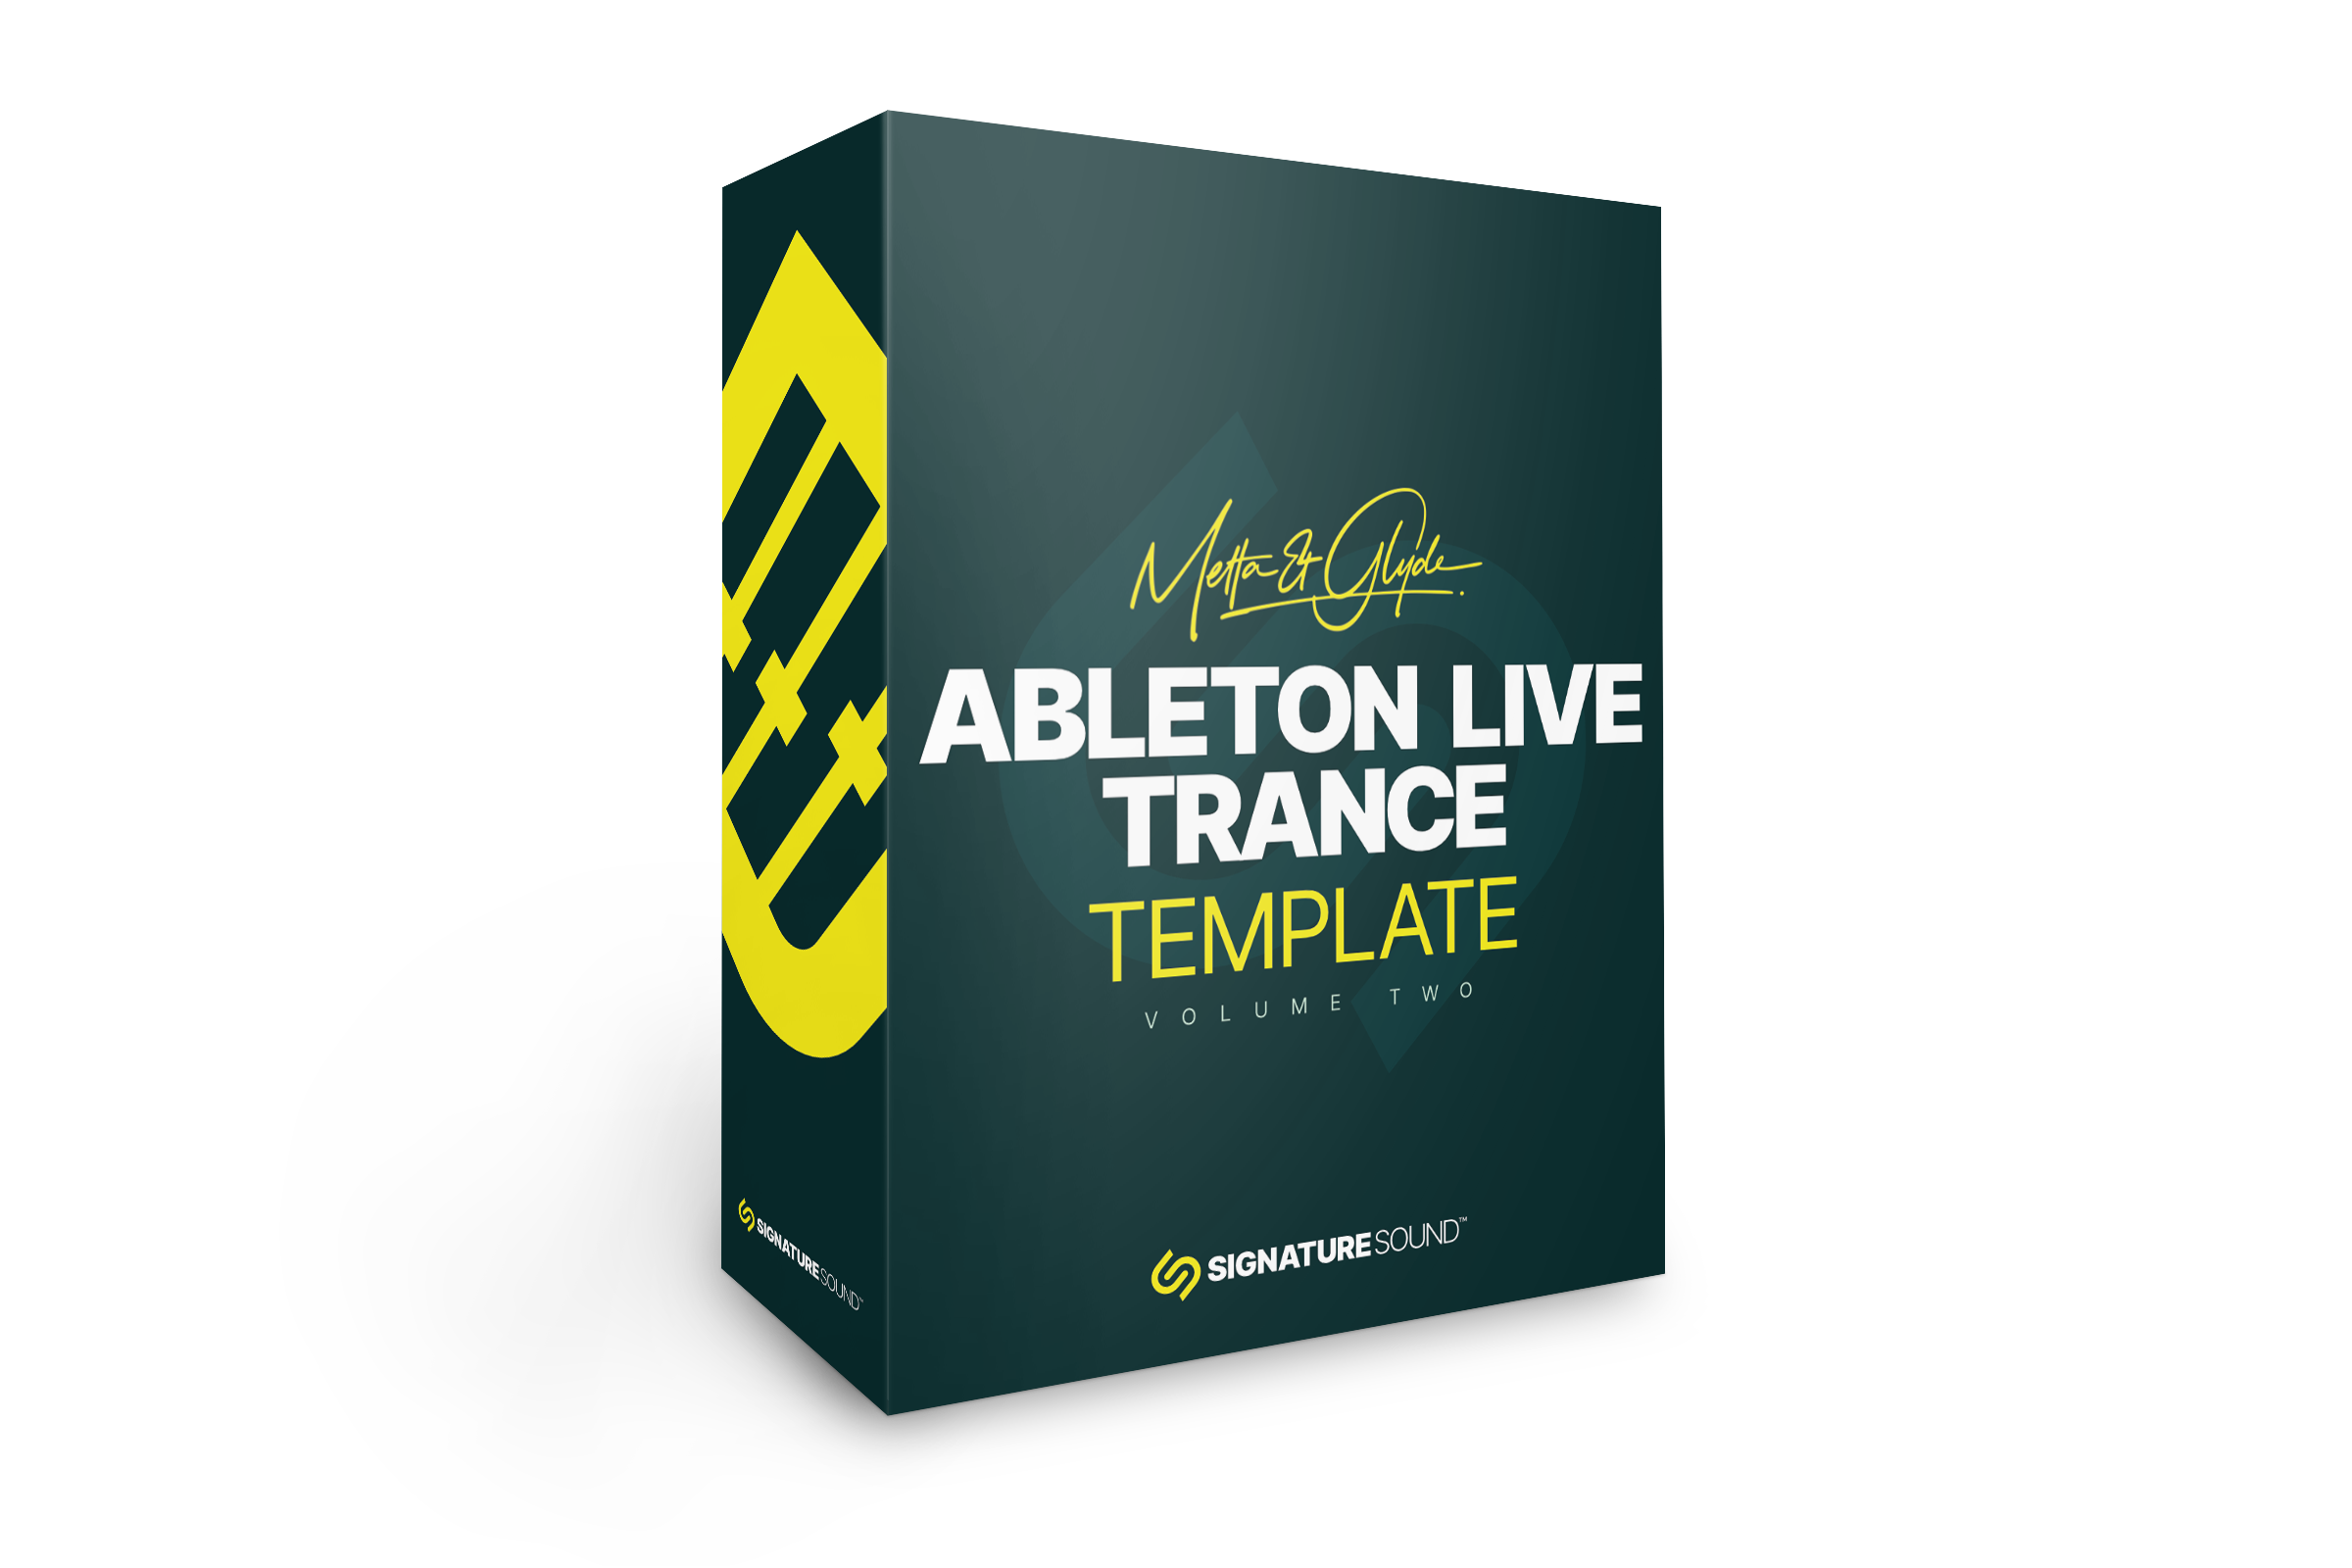 Metta and Glyde Trance Template [Ableton Live] Volume Two